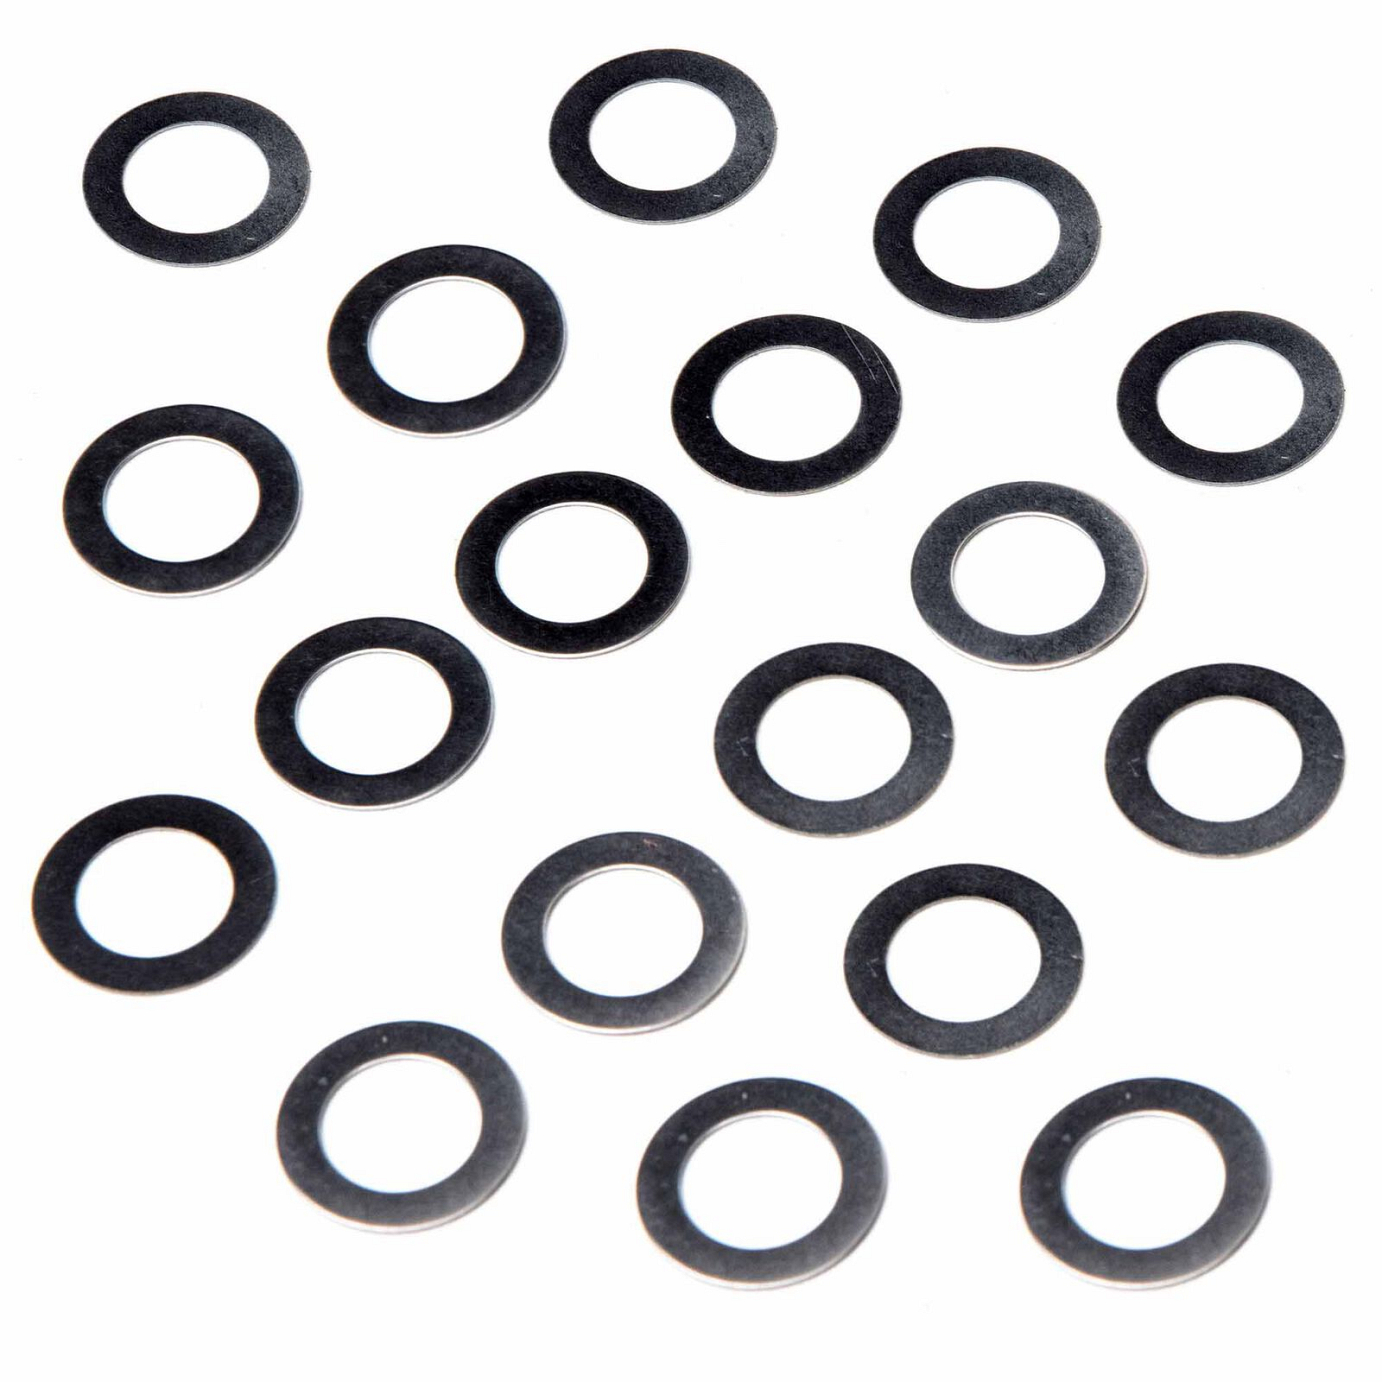 Axial 9.5x16mm Shim Set in .1, .3, .5mm Thickness, 6pcs each